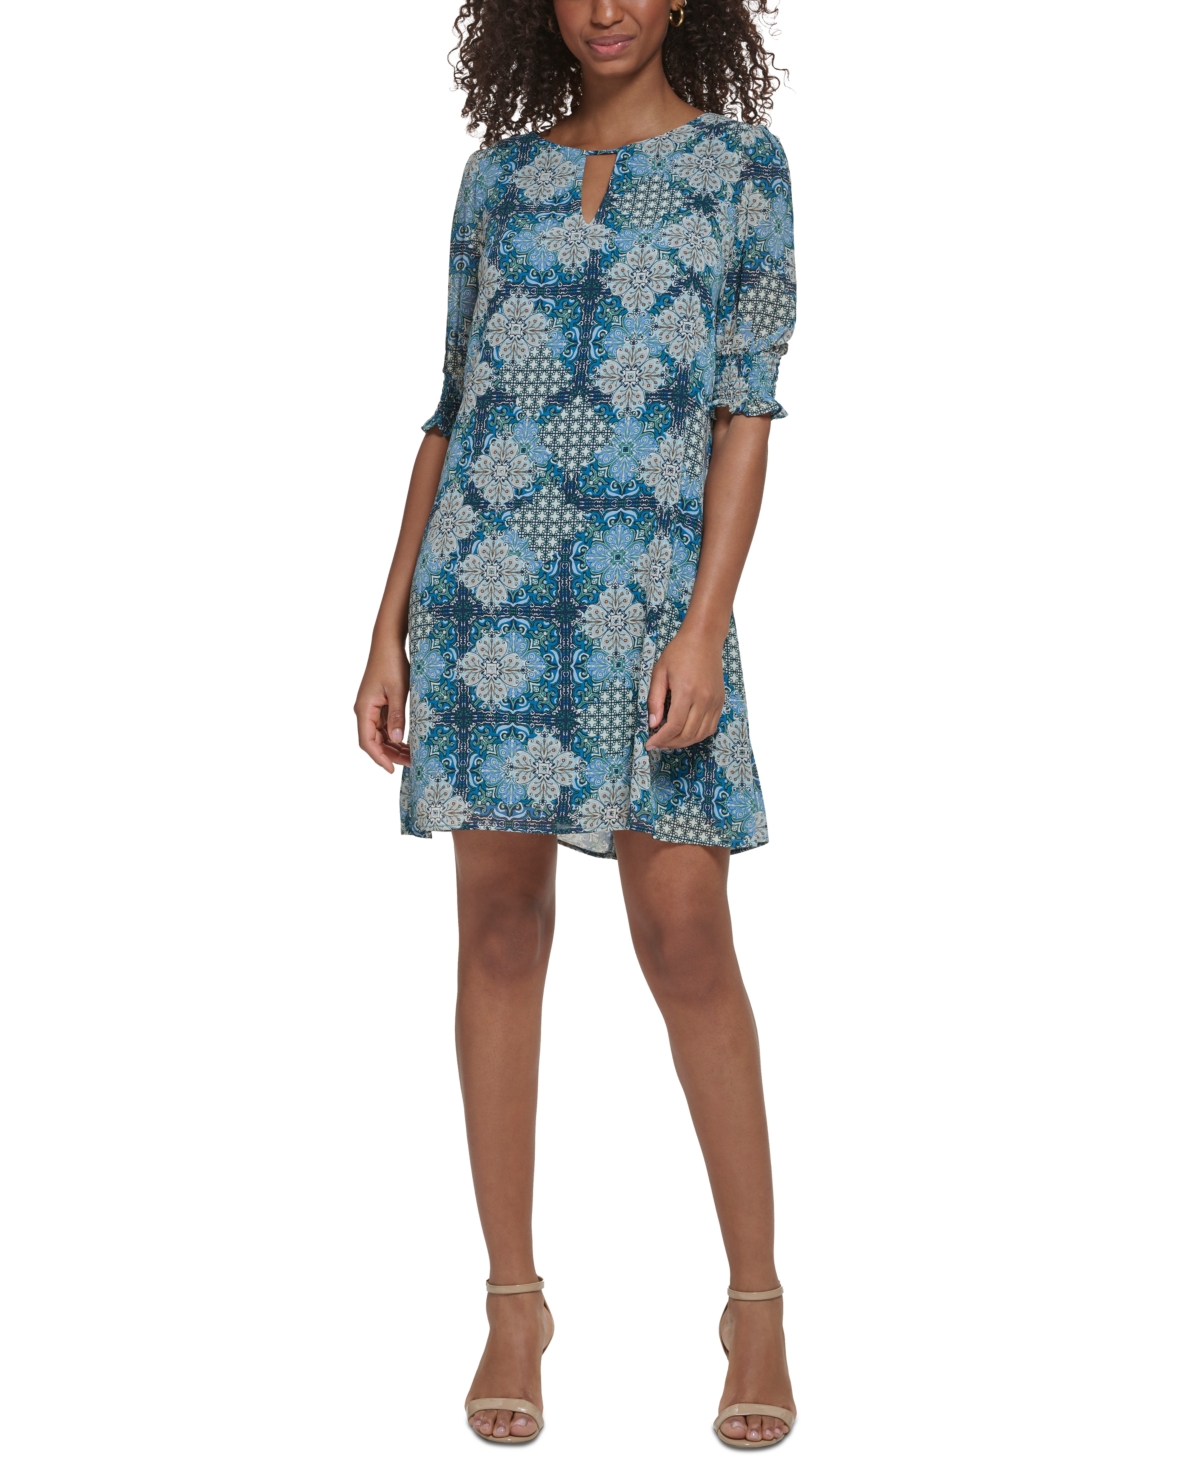 Women's Printed Elbow-Sleeve A-Line Dress - Teal